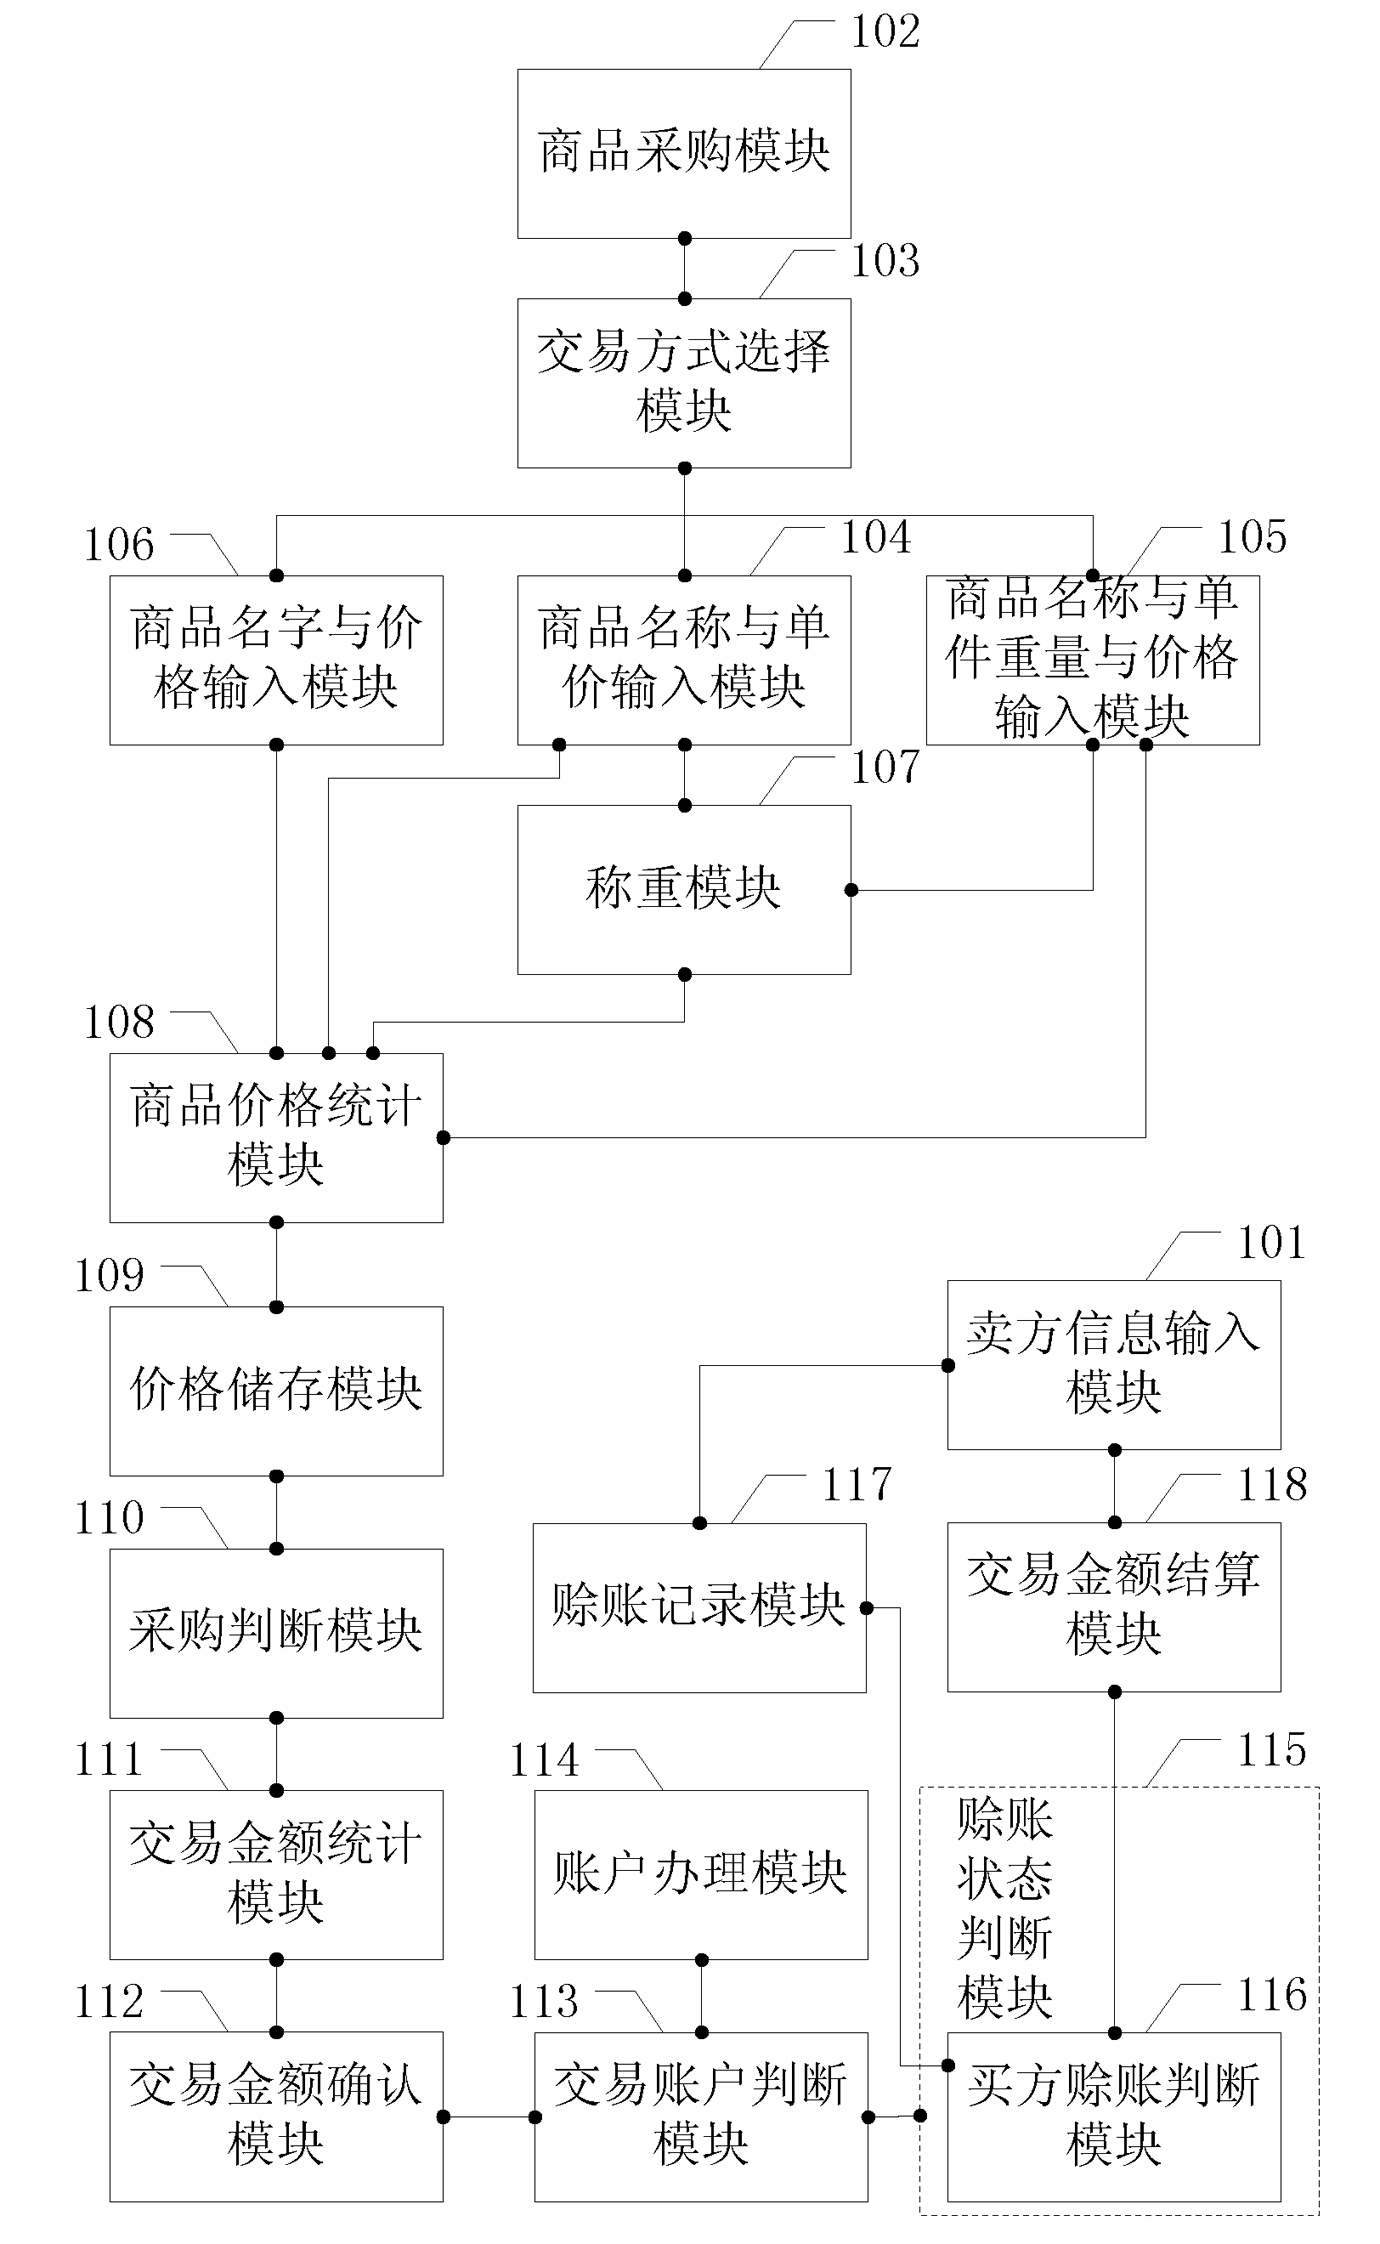 System and method for weighing and valuating agricultural product and method thereof